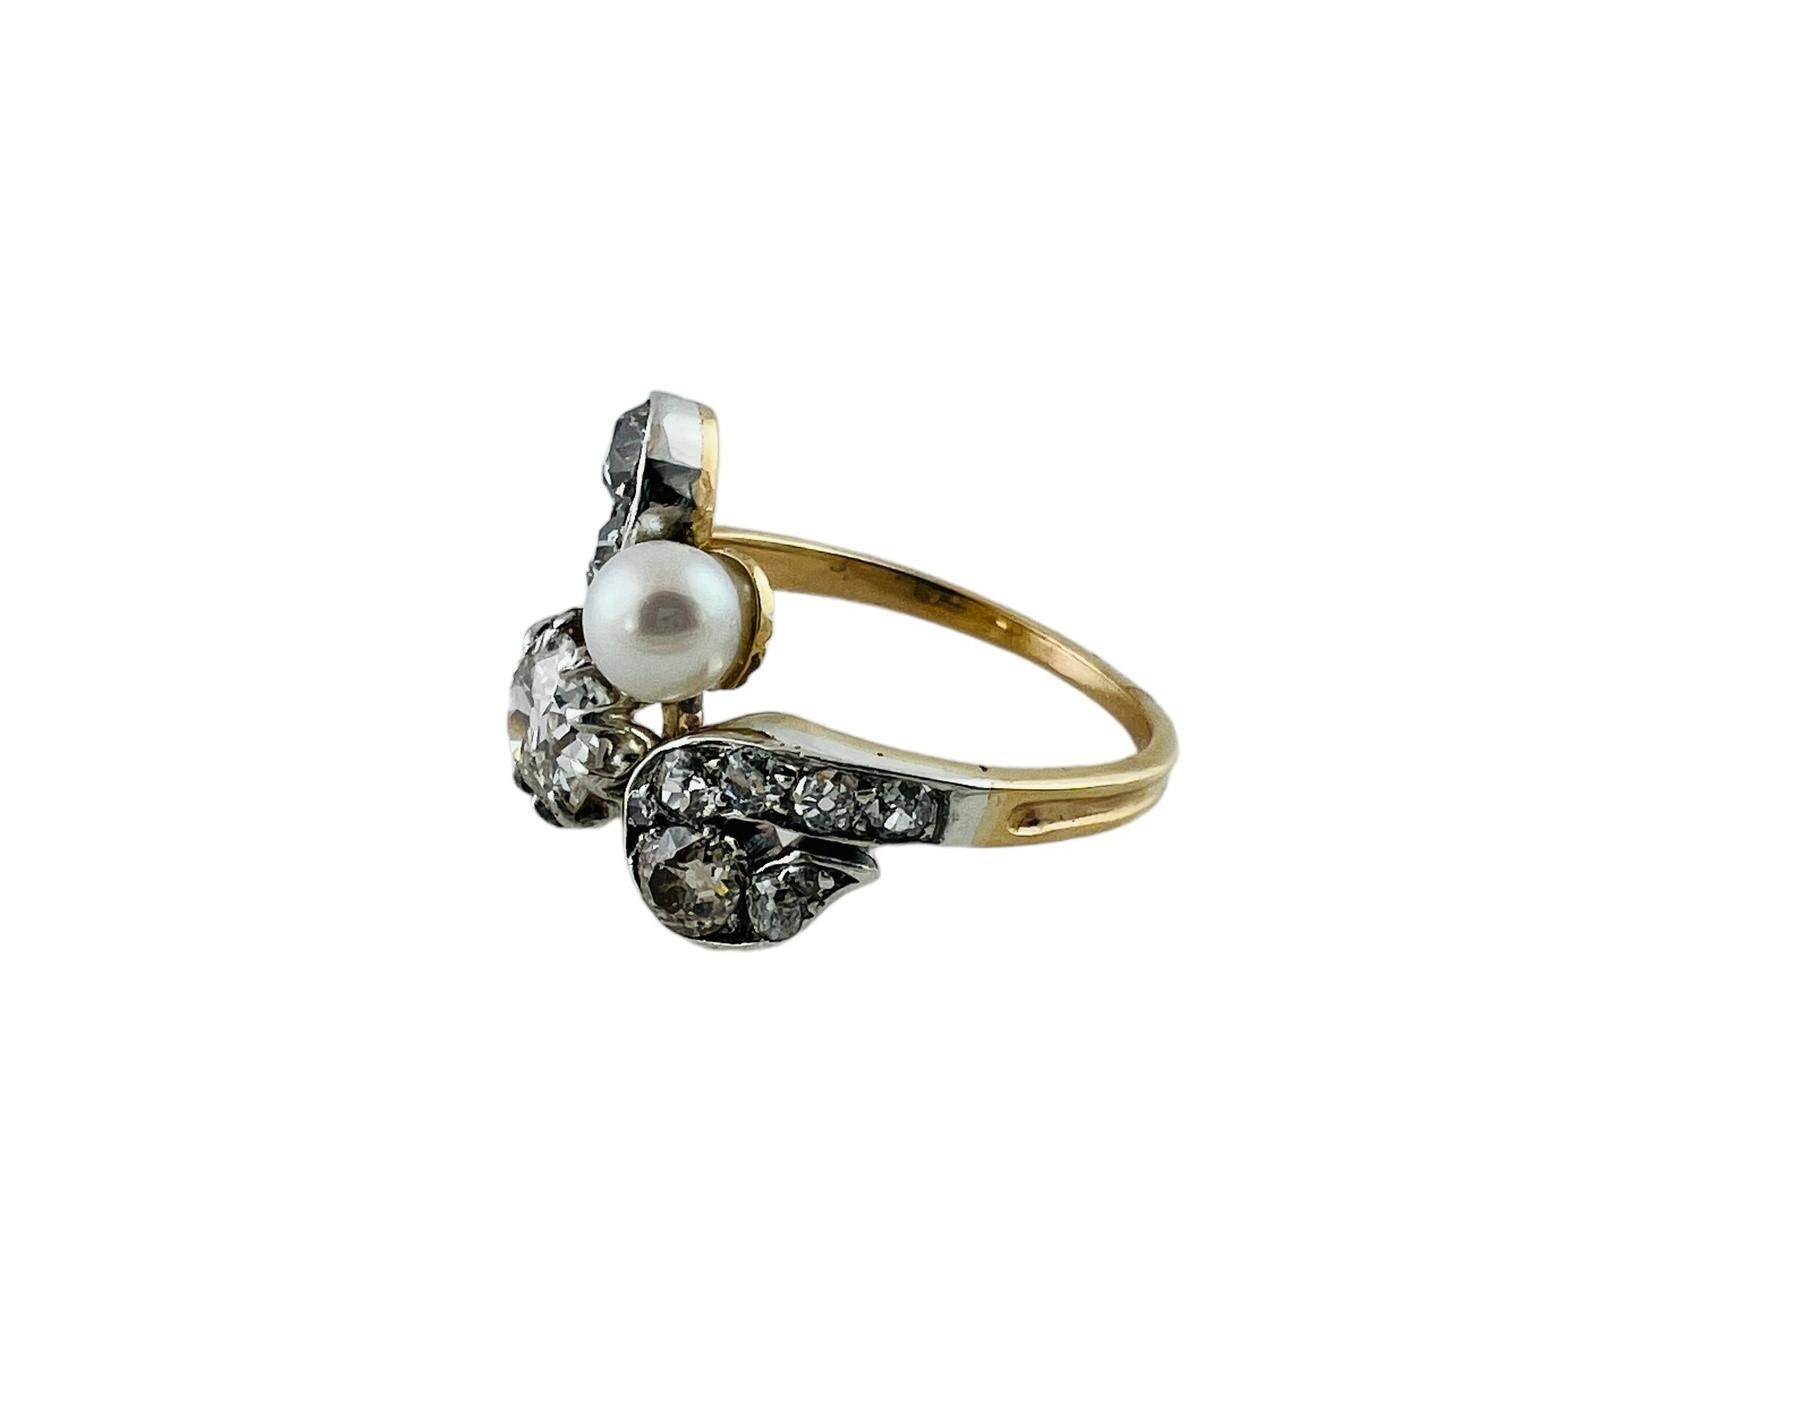 Vintage 14K Yellow and White Gold Diamond and Pearl Ring 1.80cttw #16585 For Sale 1